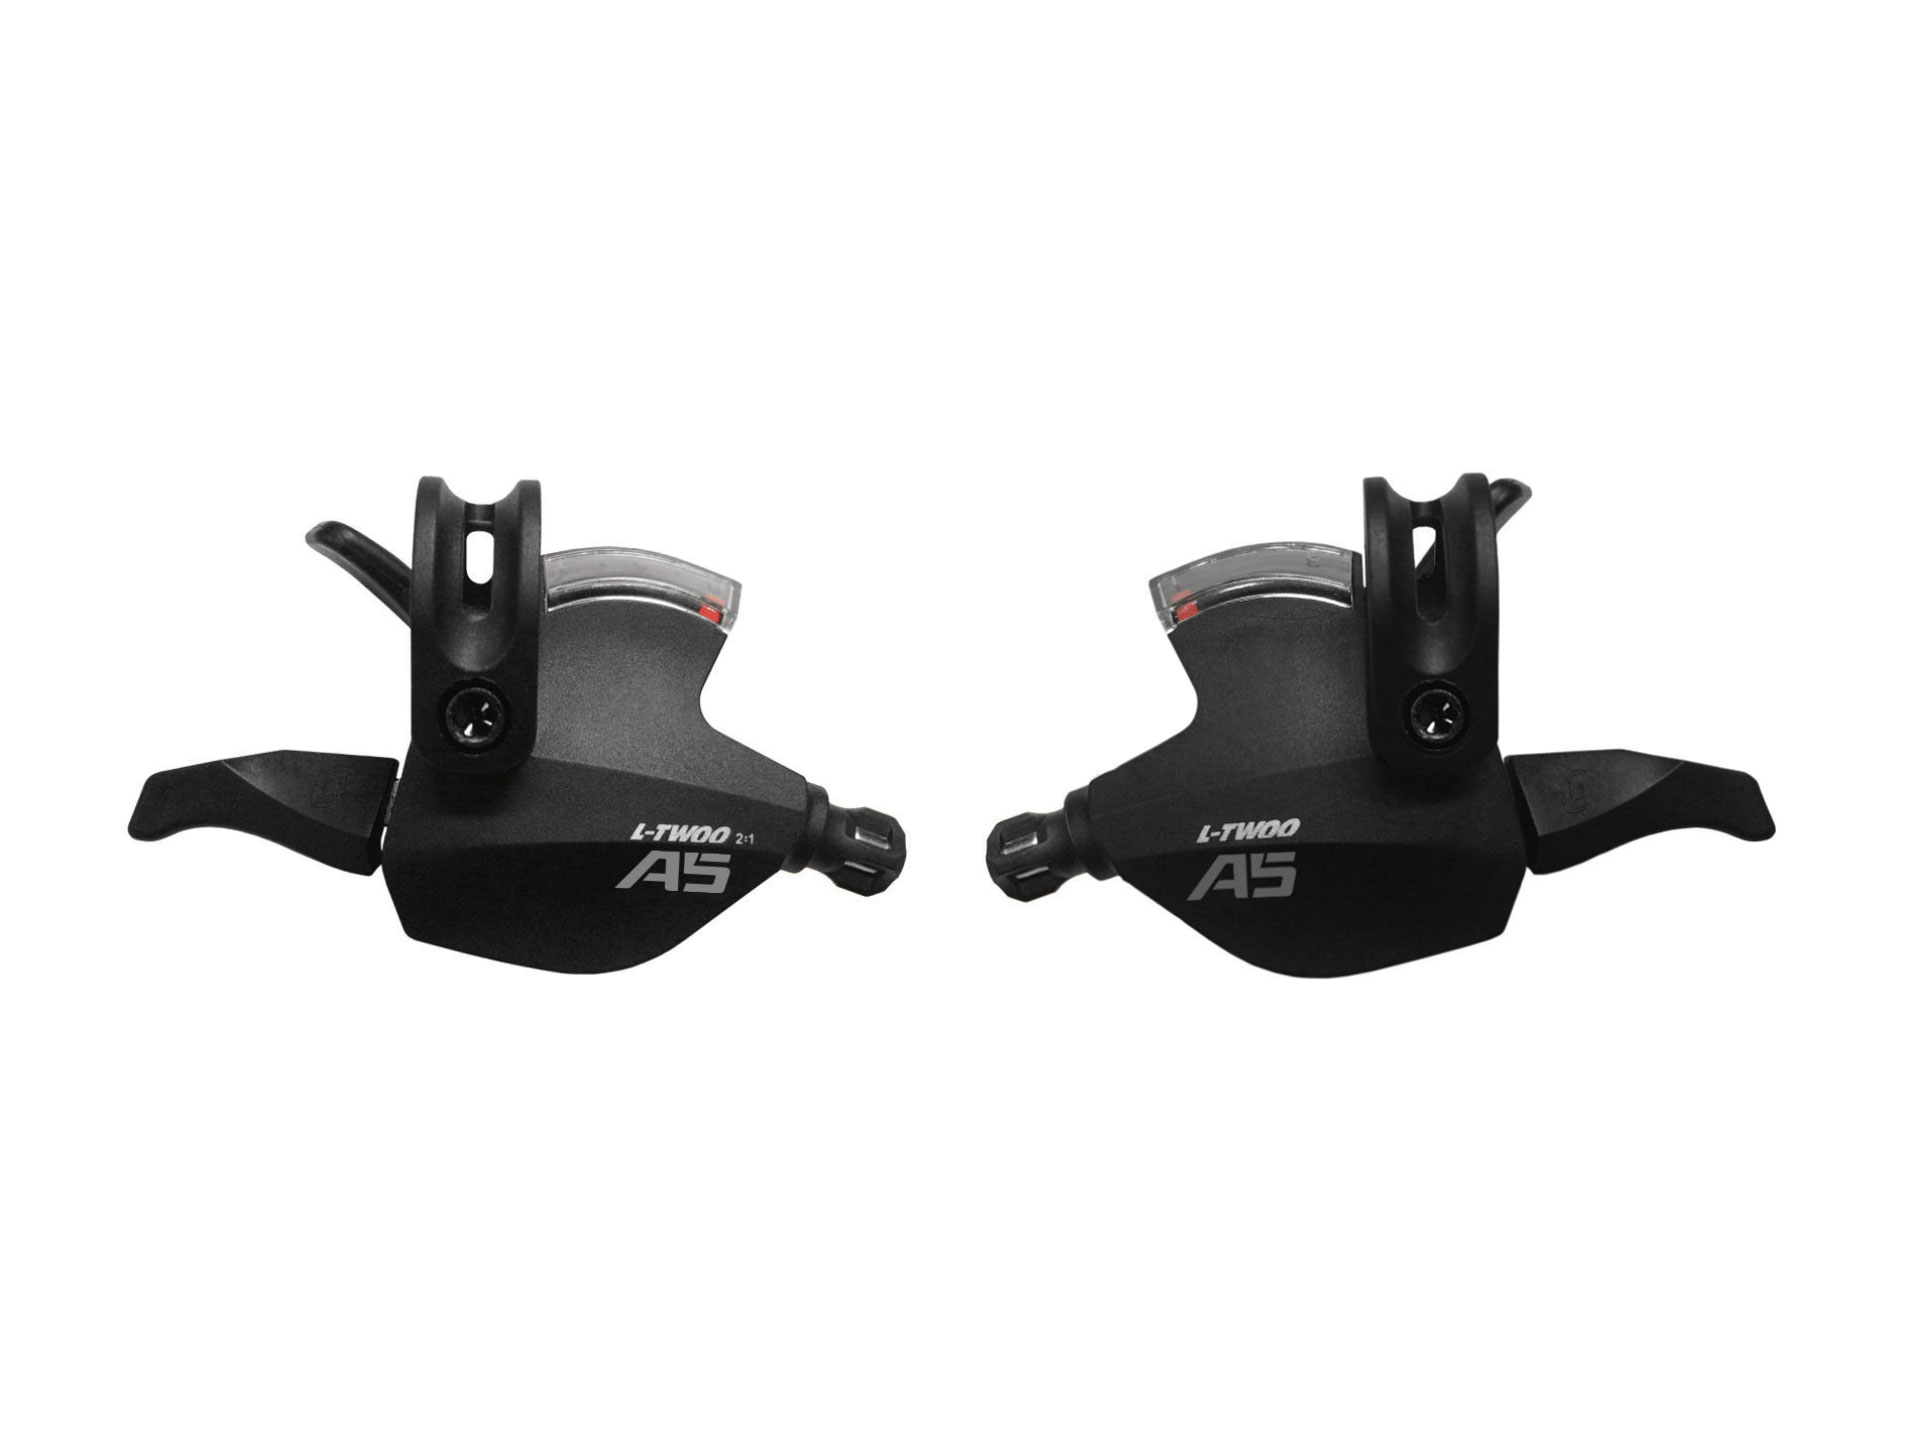 LTWOO A5 2/3X9 Speed Shifter Shimano Compatible